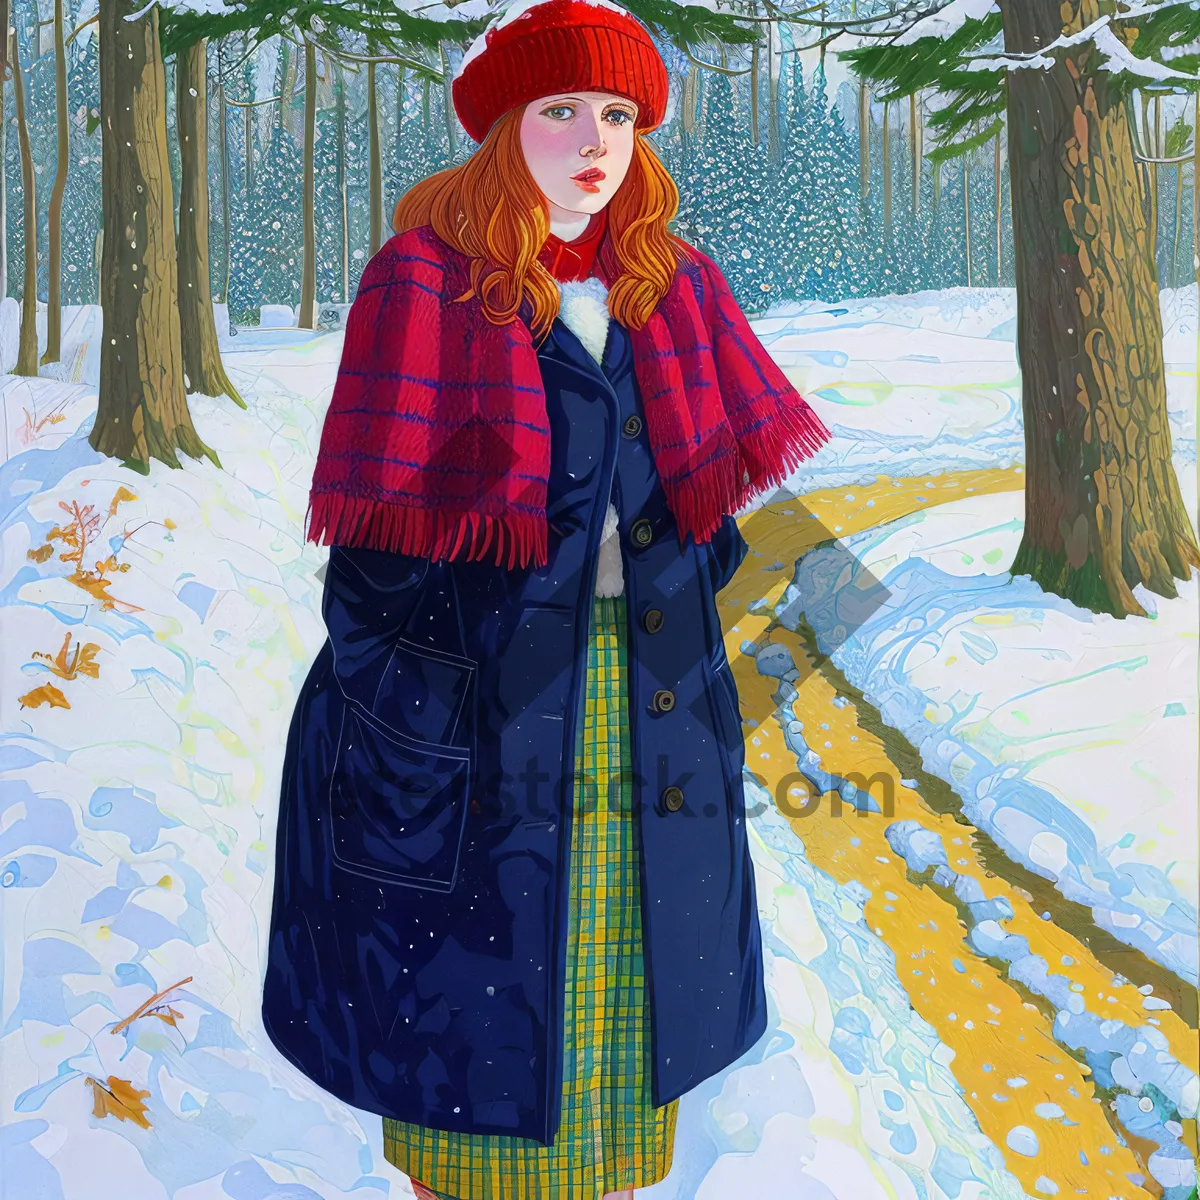 Picture of Smiling lady in fashionable winter attire with scarf